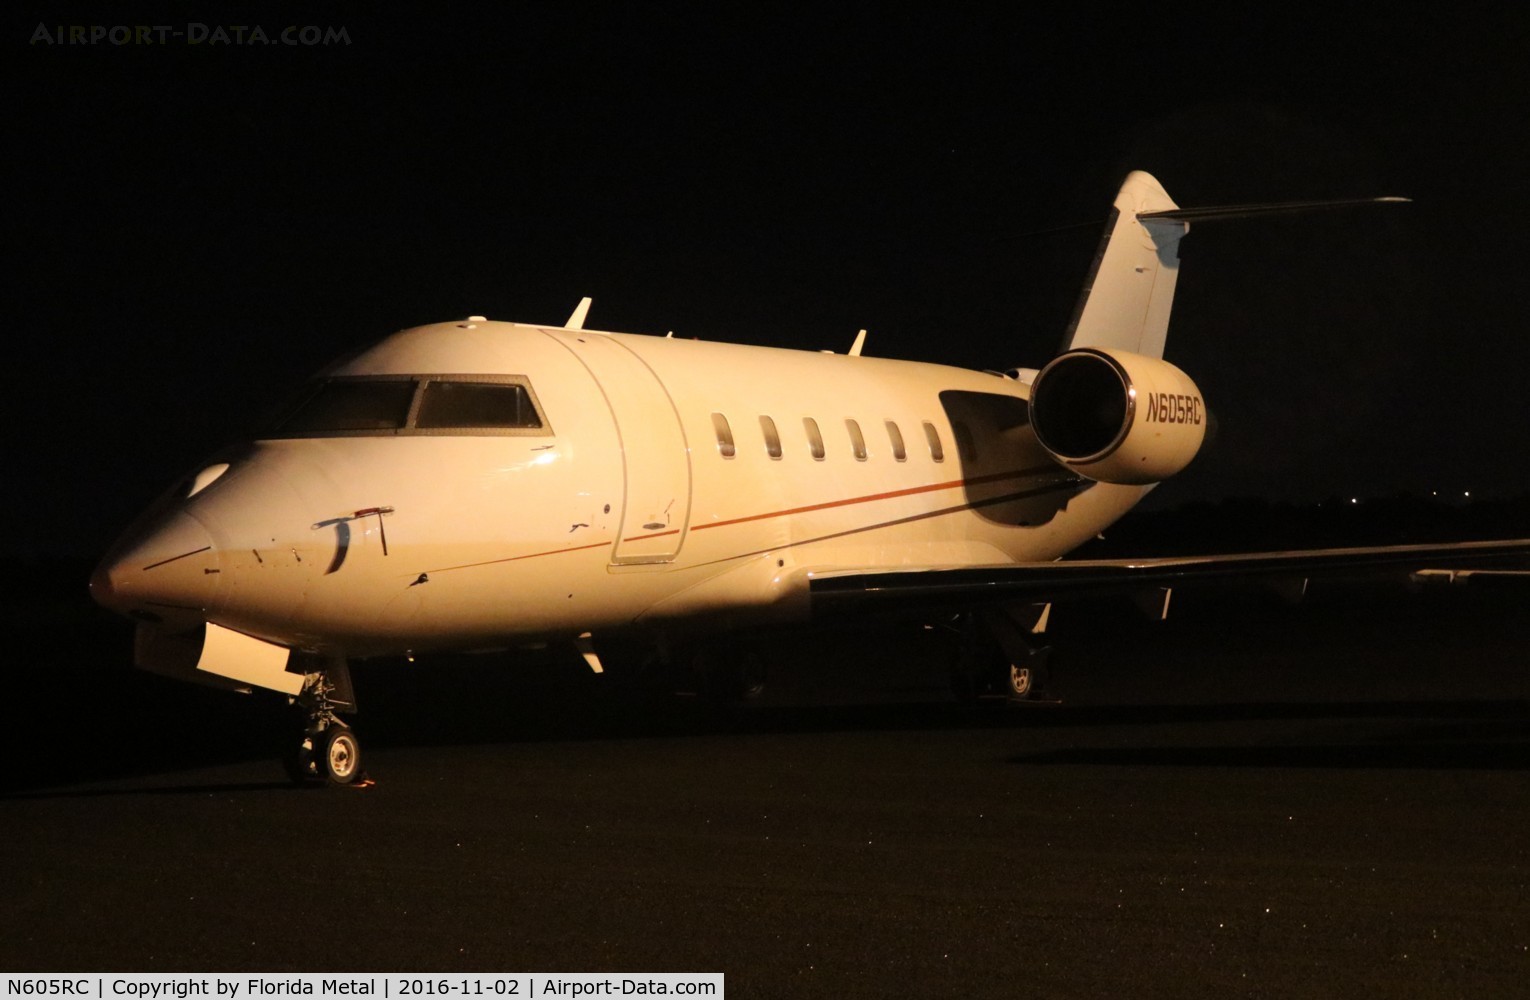 N605RC, 2009 Bombardier Challenger 605 (CL-600-2B16) C/N 5800, Challenger 605